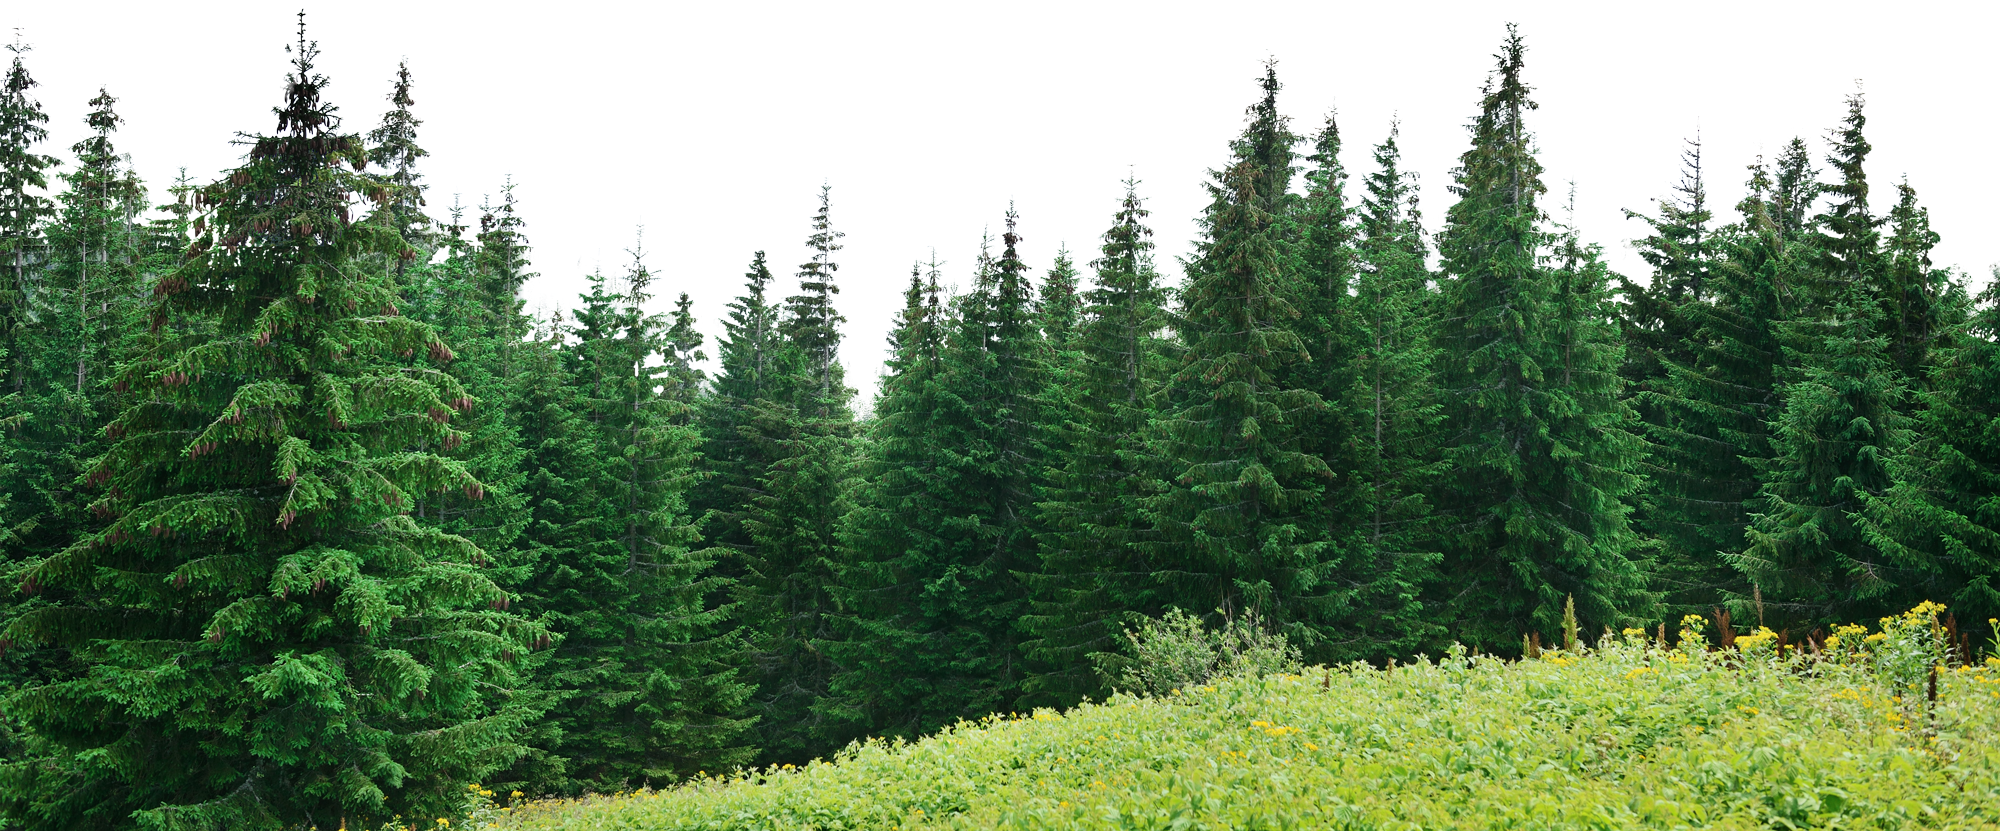 Download PNG image - Picsart Forest PNG Pic 